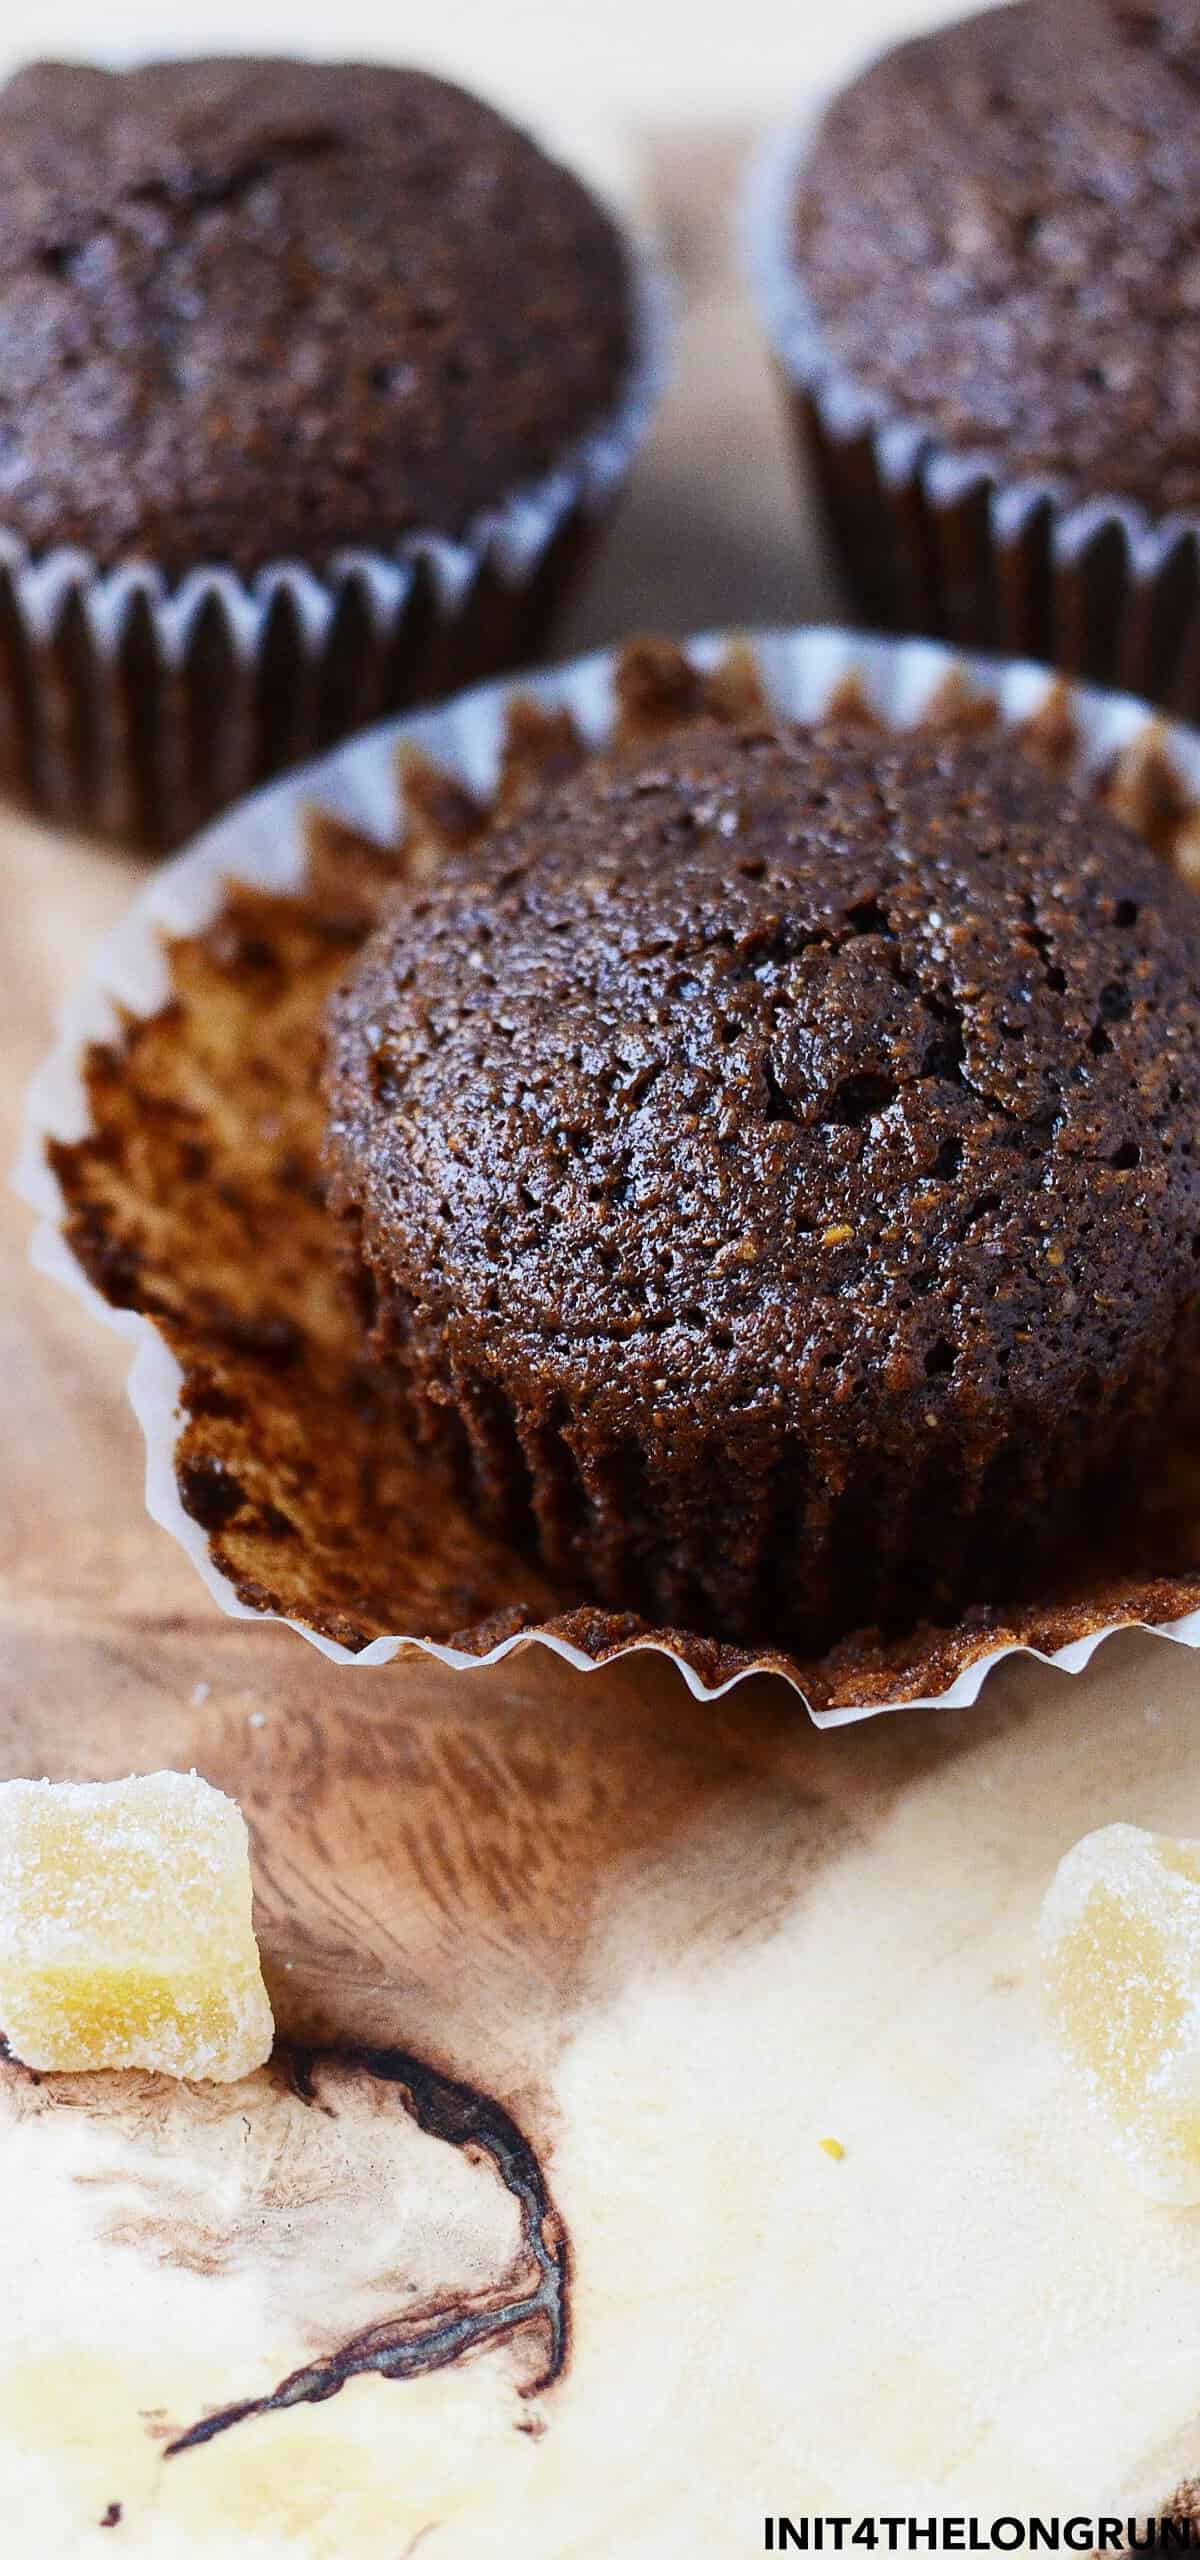  Your kitchen will smell like a holiday haven with these muffins baking in the oven.